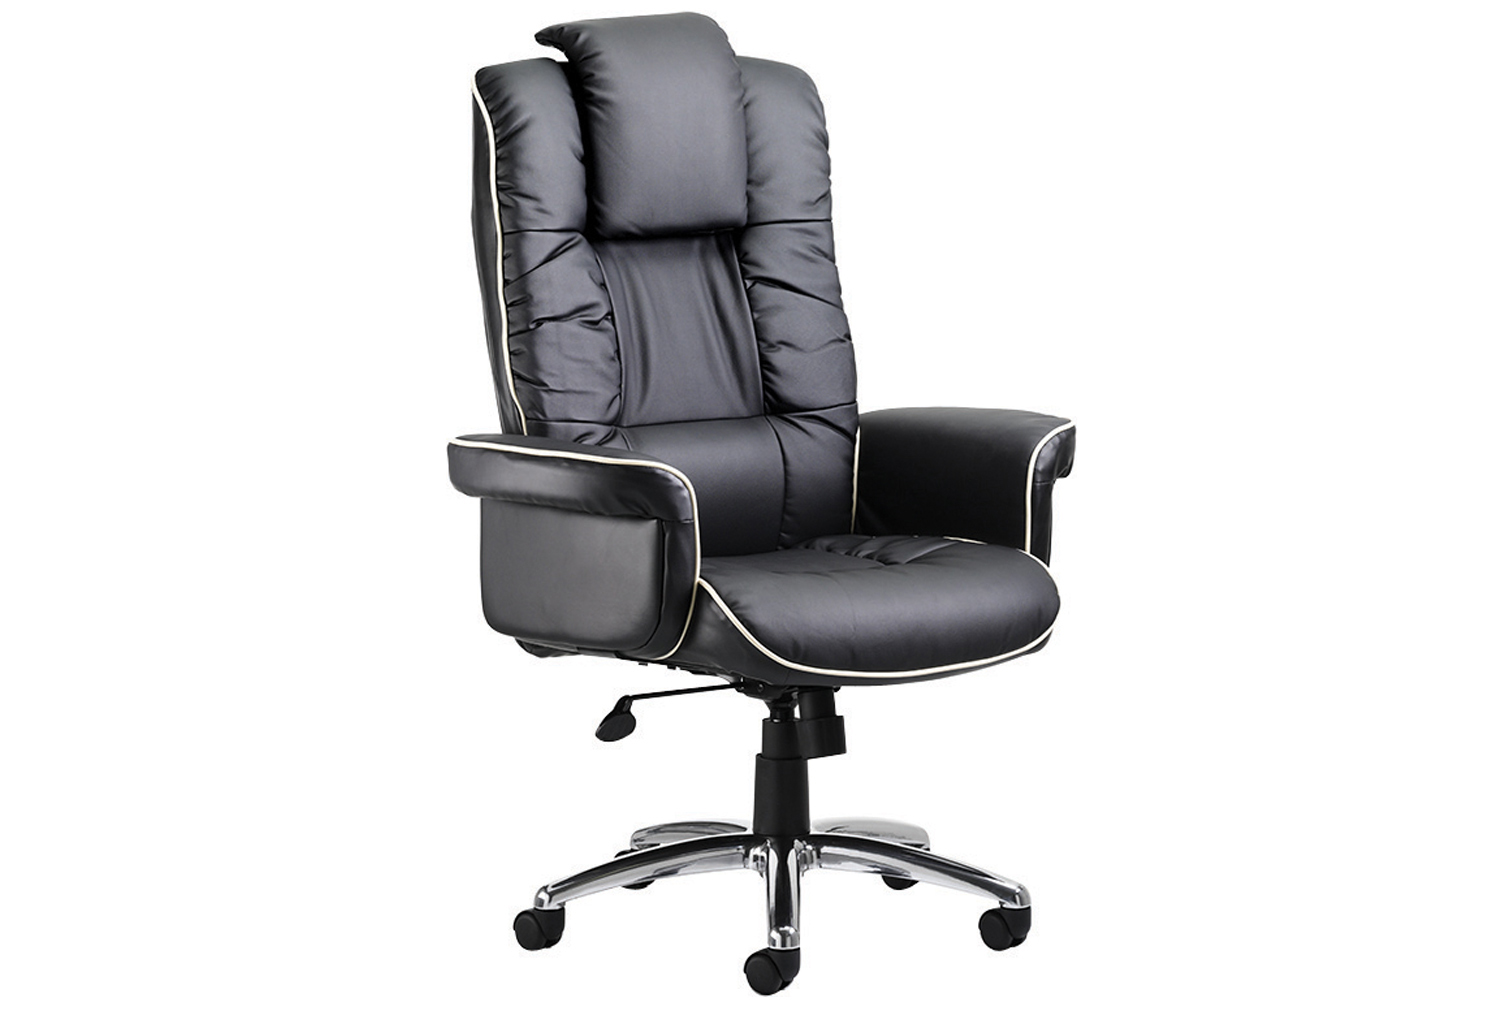 Preto Black Leather Faced Executive Office Chair, Black, Fully Installed